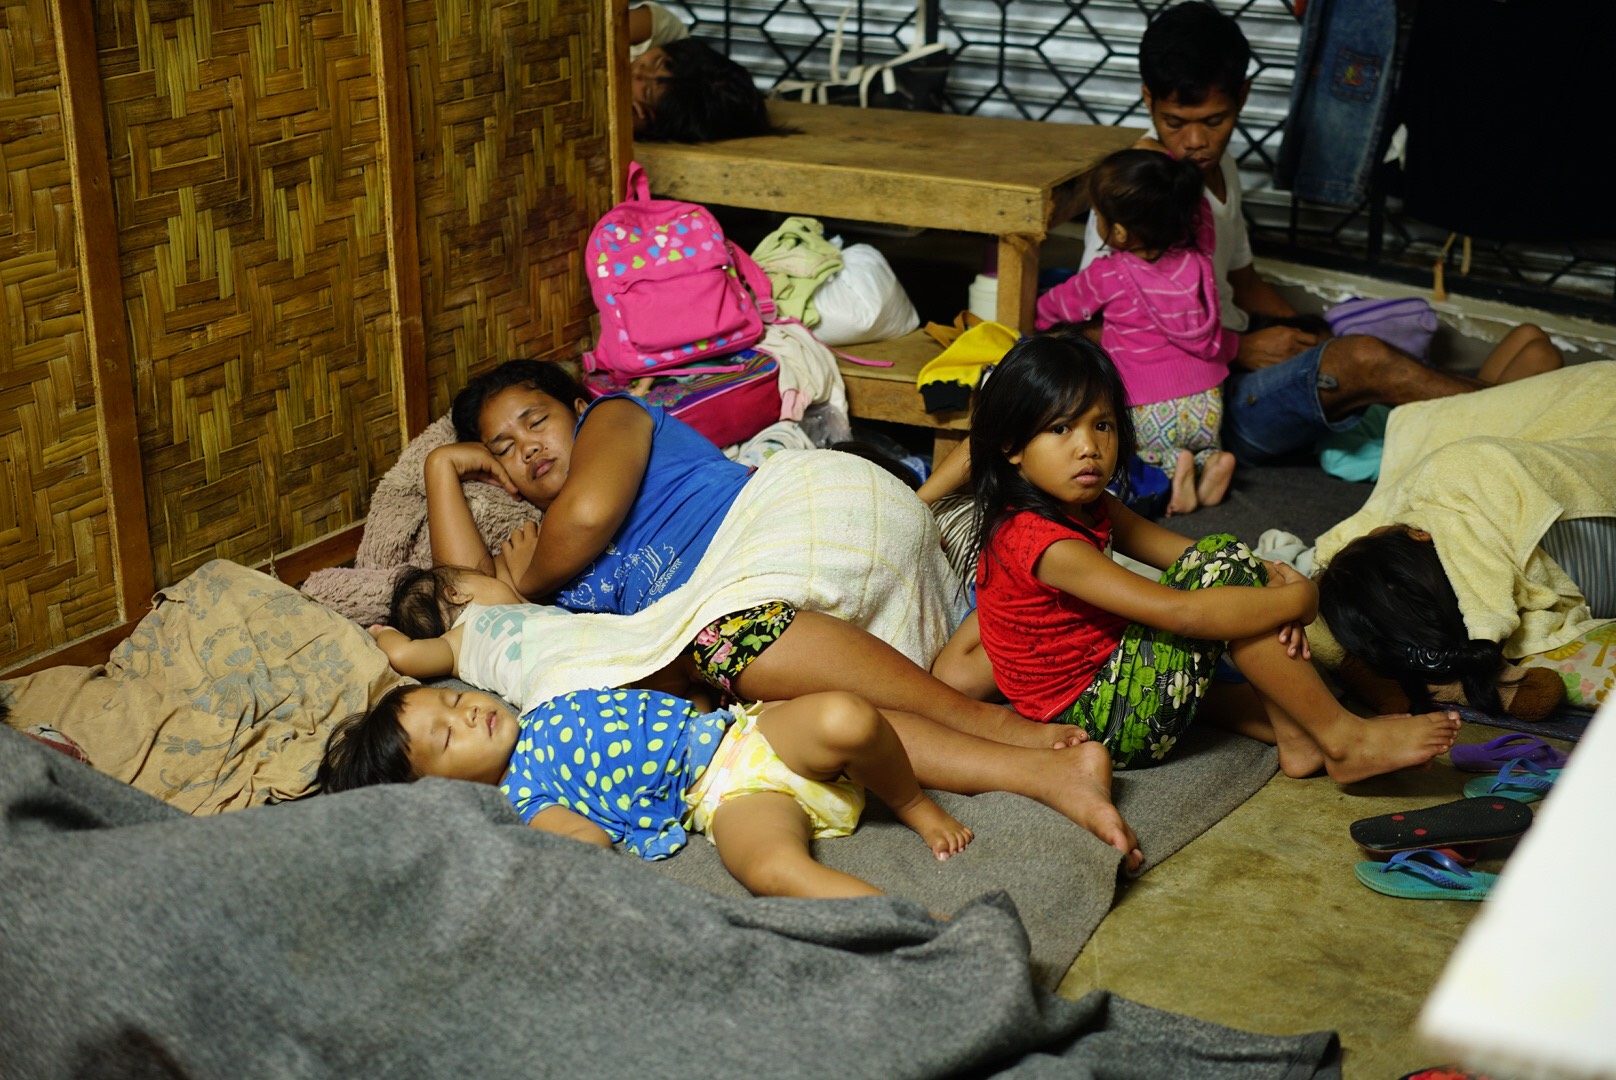 DSWD: Over 220,000 affected due to Urduja